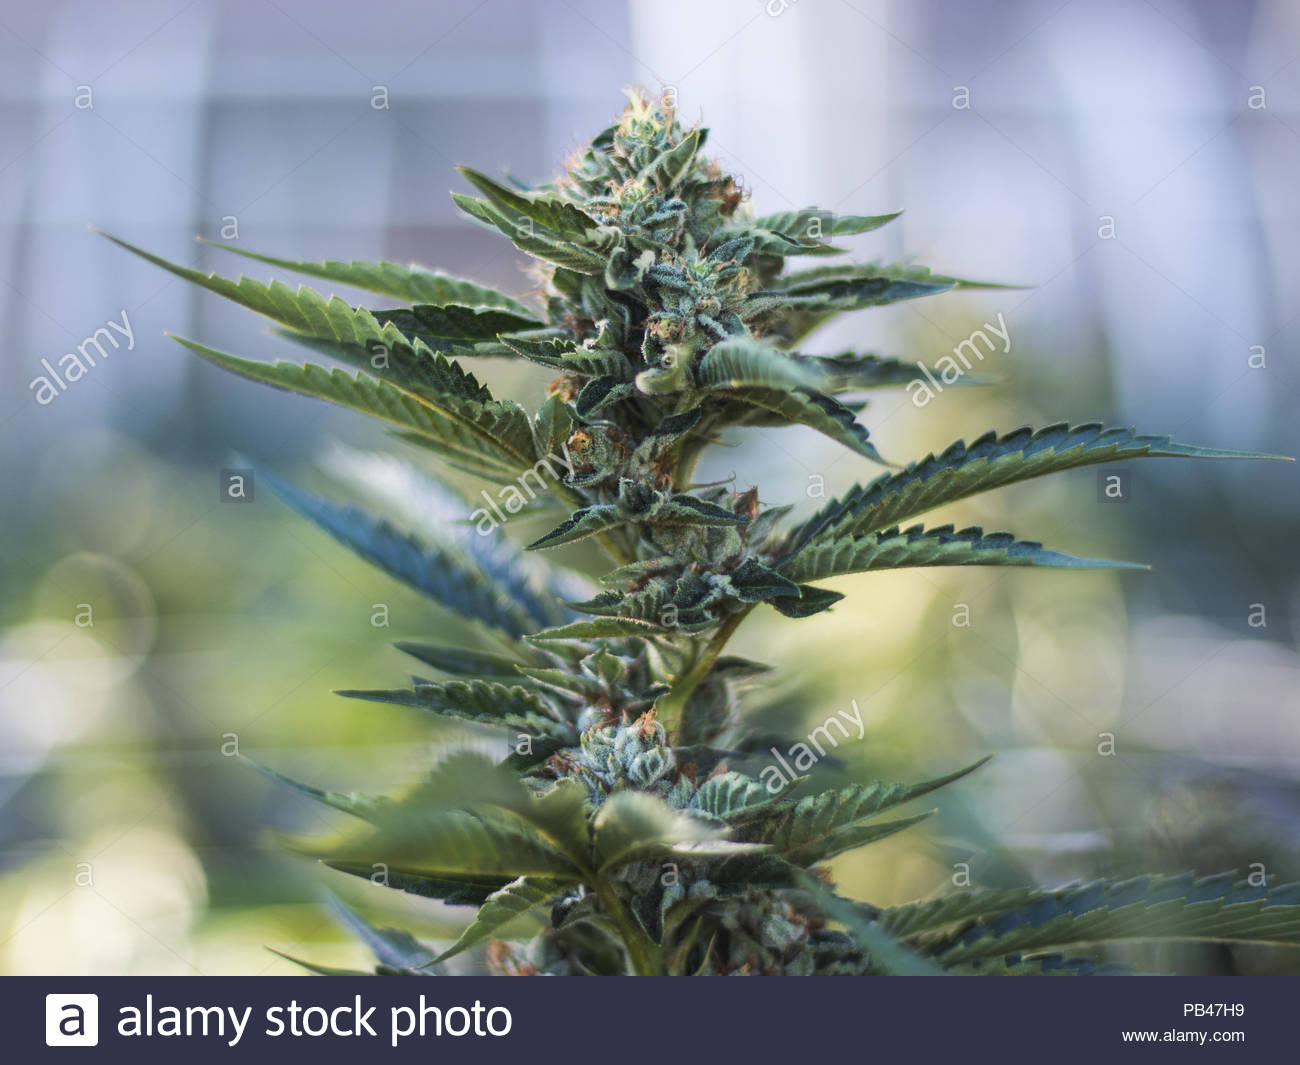 Weed Flower Growing With The Background Blur Og Kush Humboldt